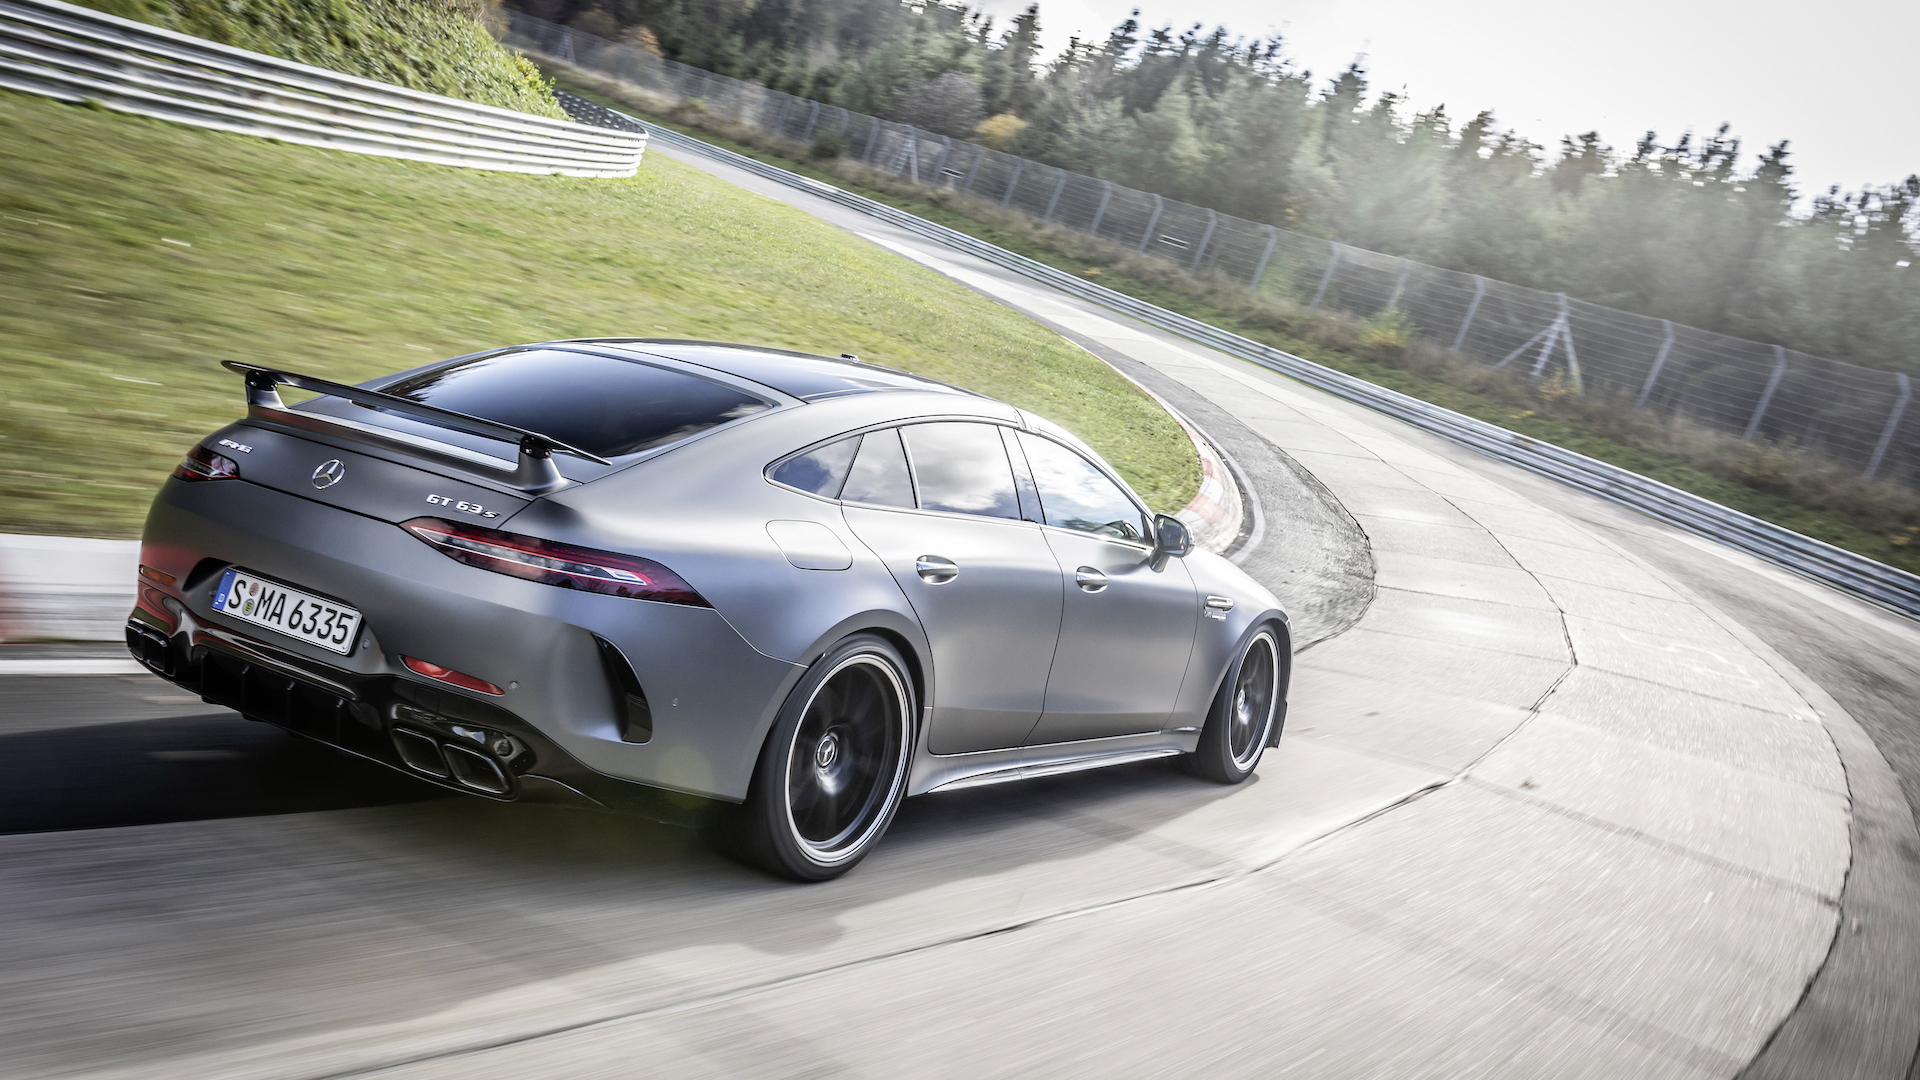 2021 Mercedes Amg Gt 63 S 4 Door Coupe Made Faster Nürburgring Proves It